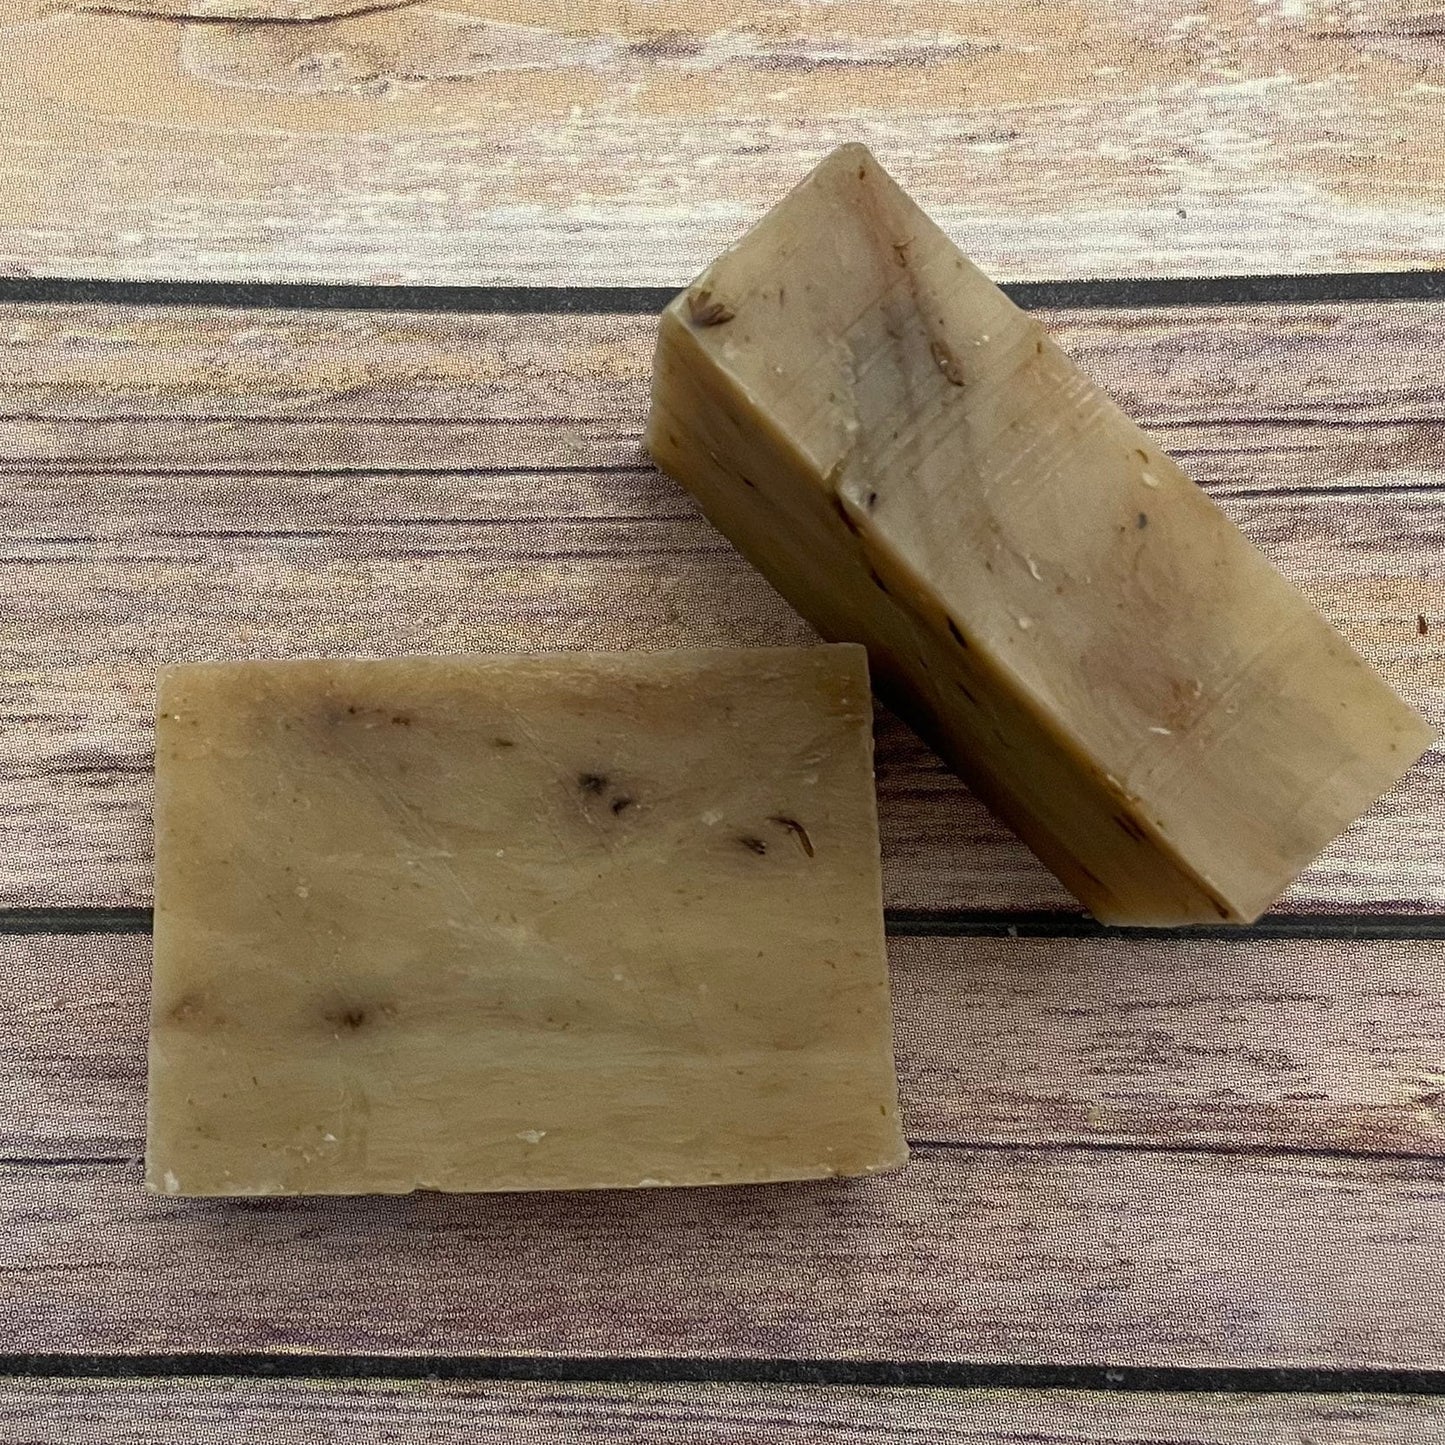 Ivy Creek Mountain Man Bar Soap | Natural Organic Soap | 4 oz | Masculine Soap | Outdoor Soap | Gifts for Him